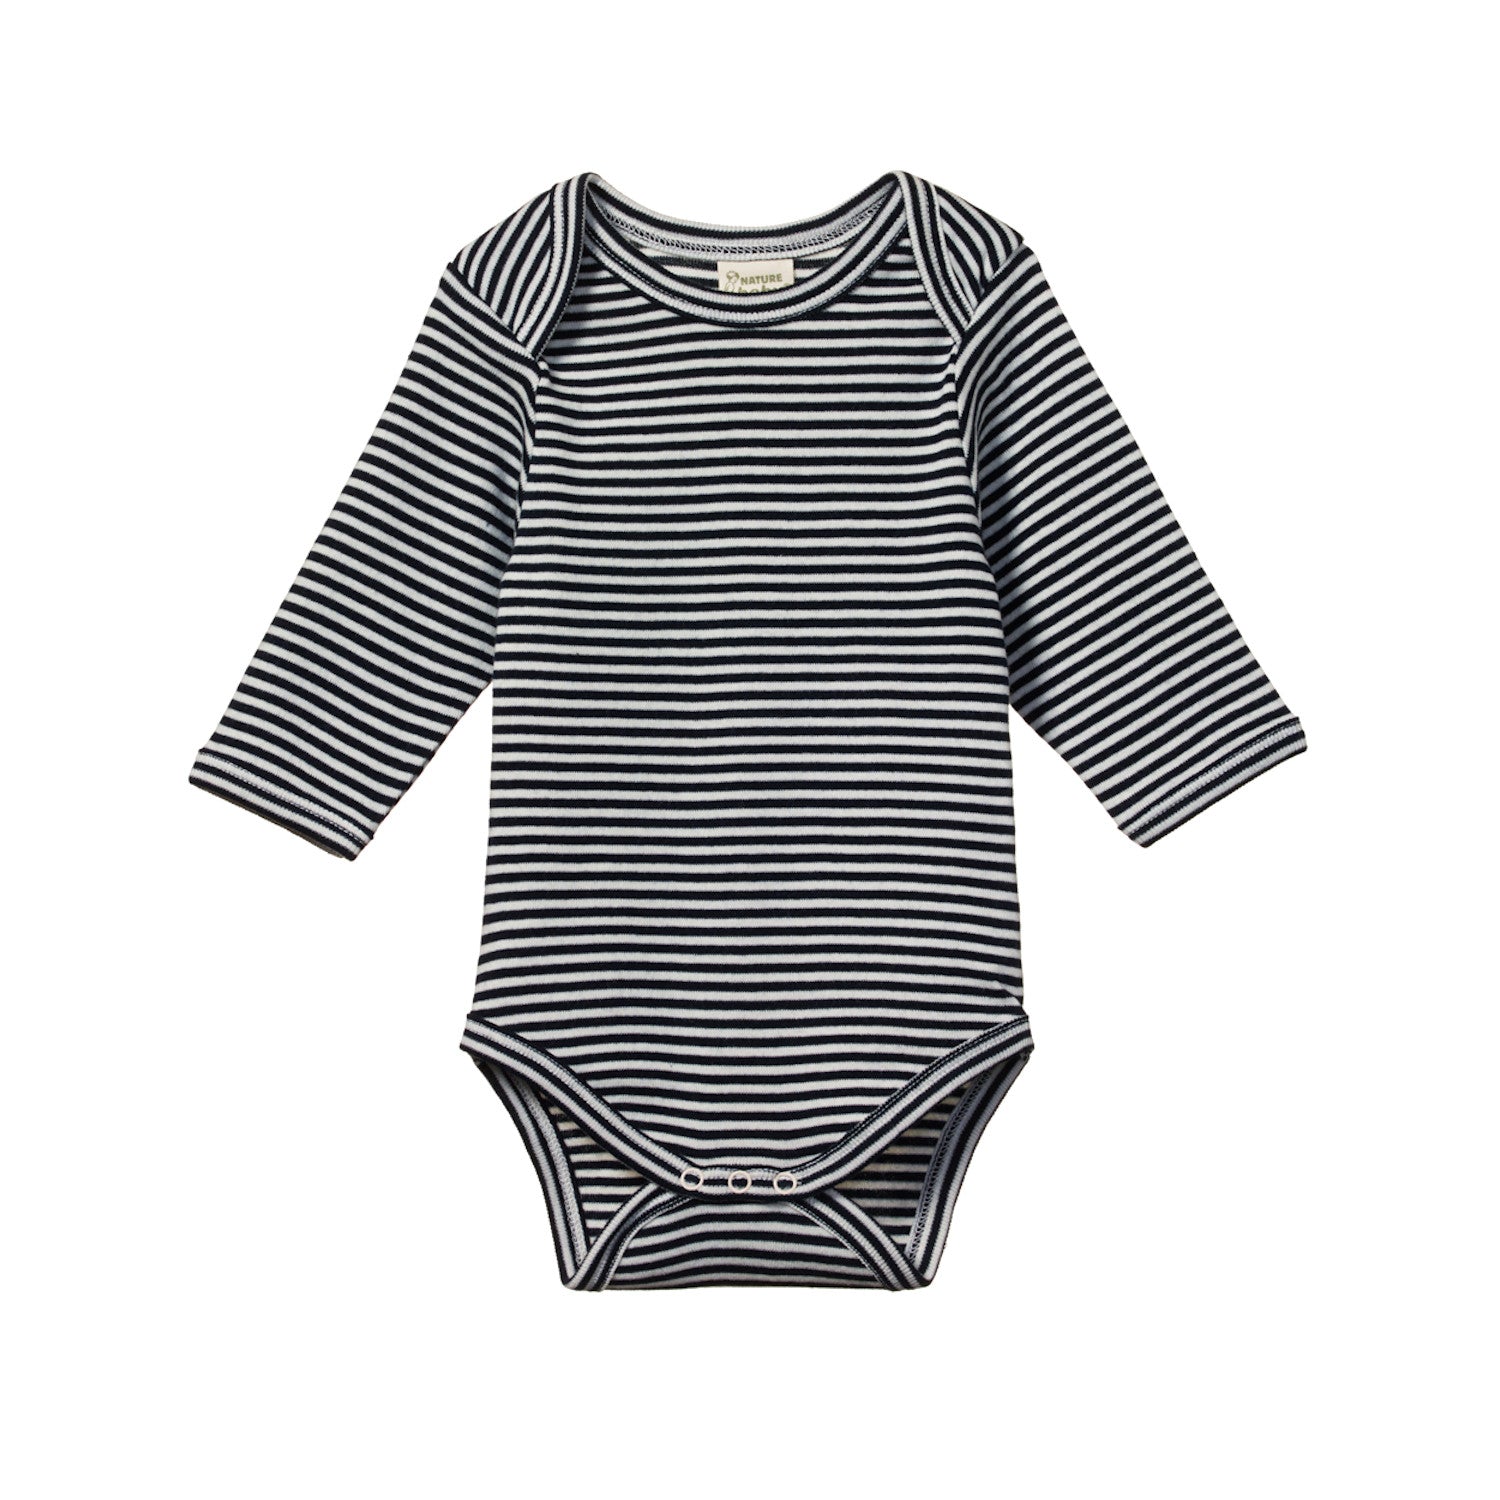 Nature Baby long sleeve body suit navy cream stripe front view